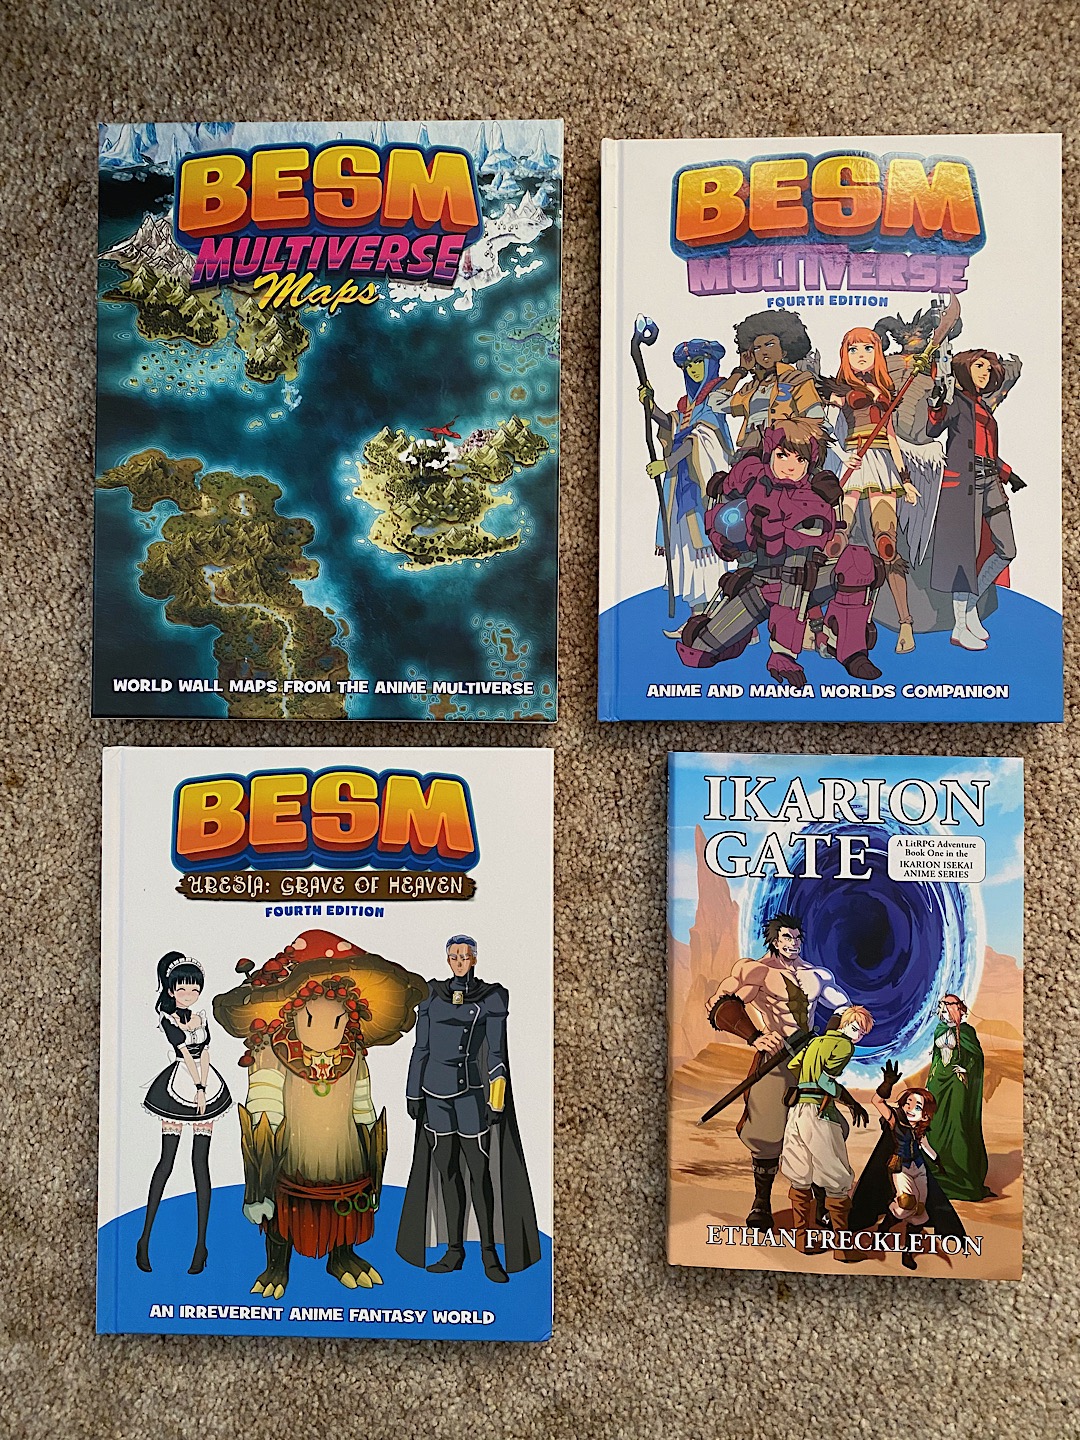 Picture of BESM Multiverse Maps, BESM Multiverse, BESM Uresia: Grave of Heavan, and Ikarion Gate, the BESM Multiverse LitRPG novel